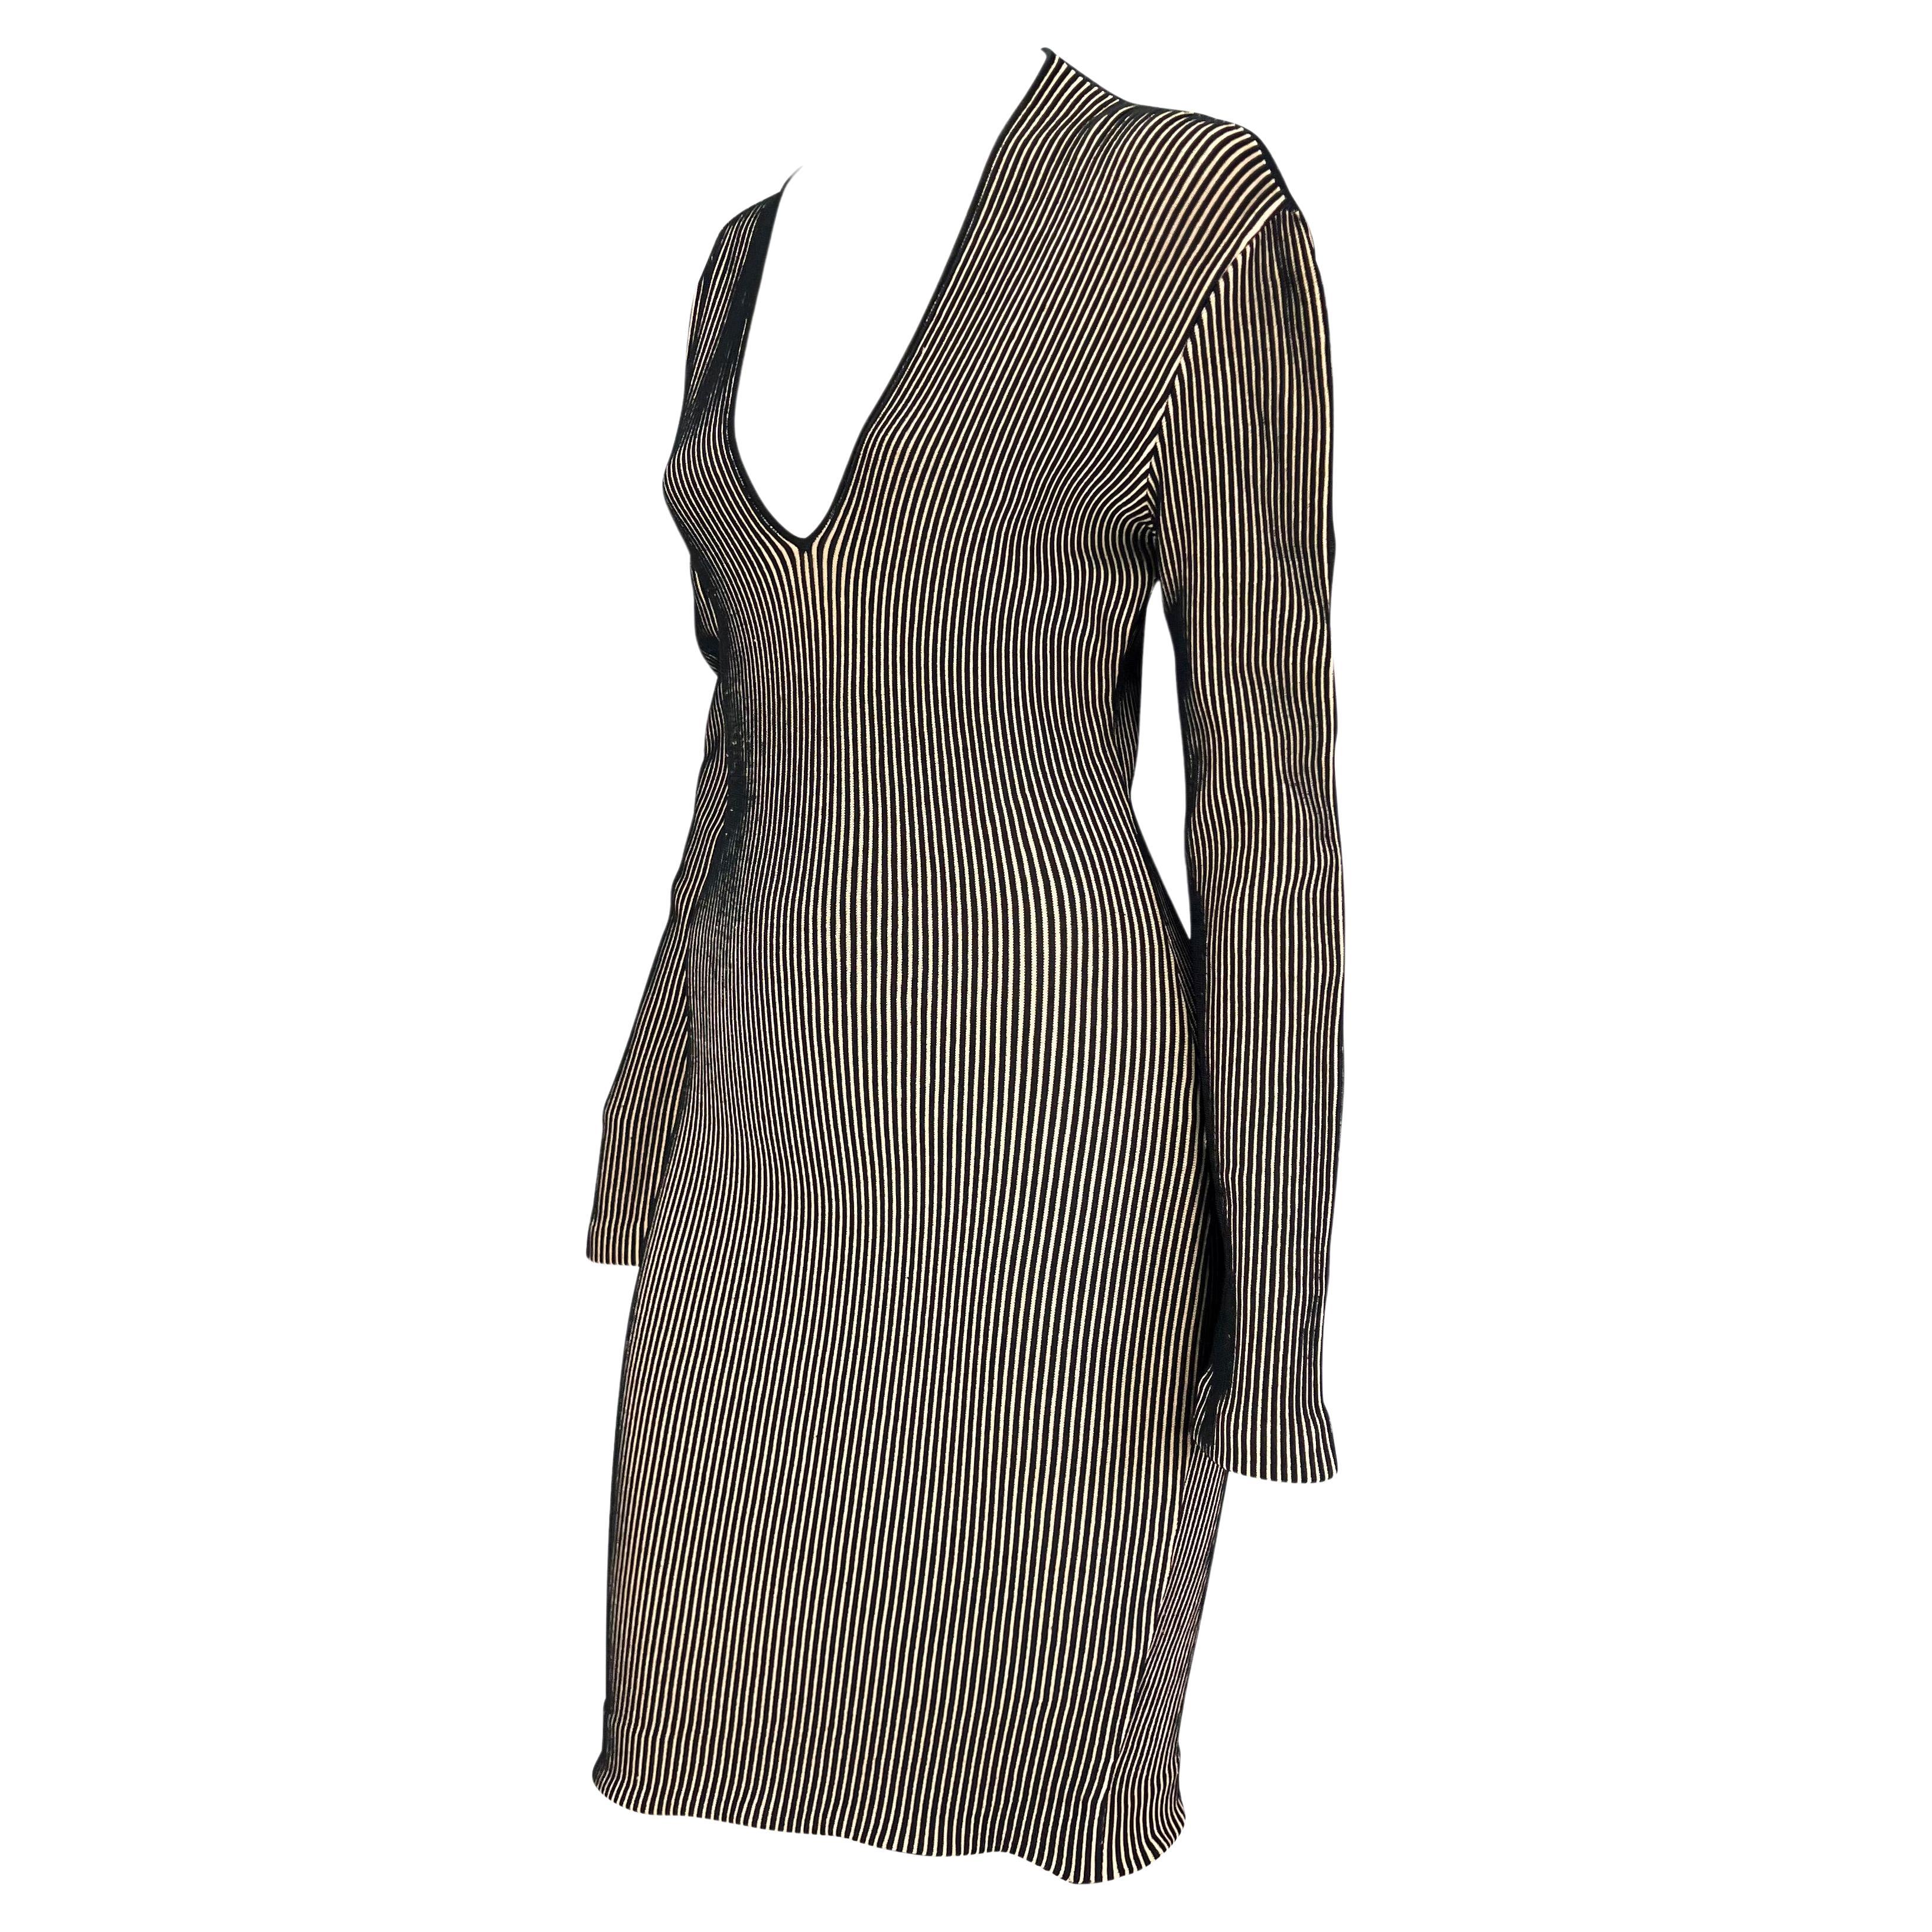 Presenting a beige and black ribbed Thierry Mugler stretch bodycon dress, designed by Manfred Mugler. From the 1990s, this fabulous form-fitting dress features a deep v-neckline, long sleeves, and a midi-length cut. This knock-out dress perfectly